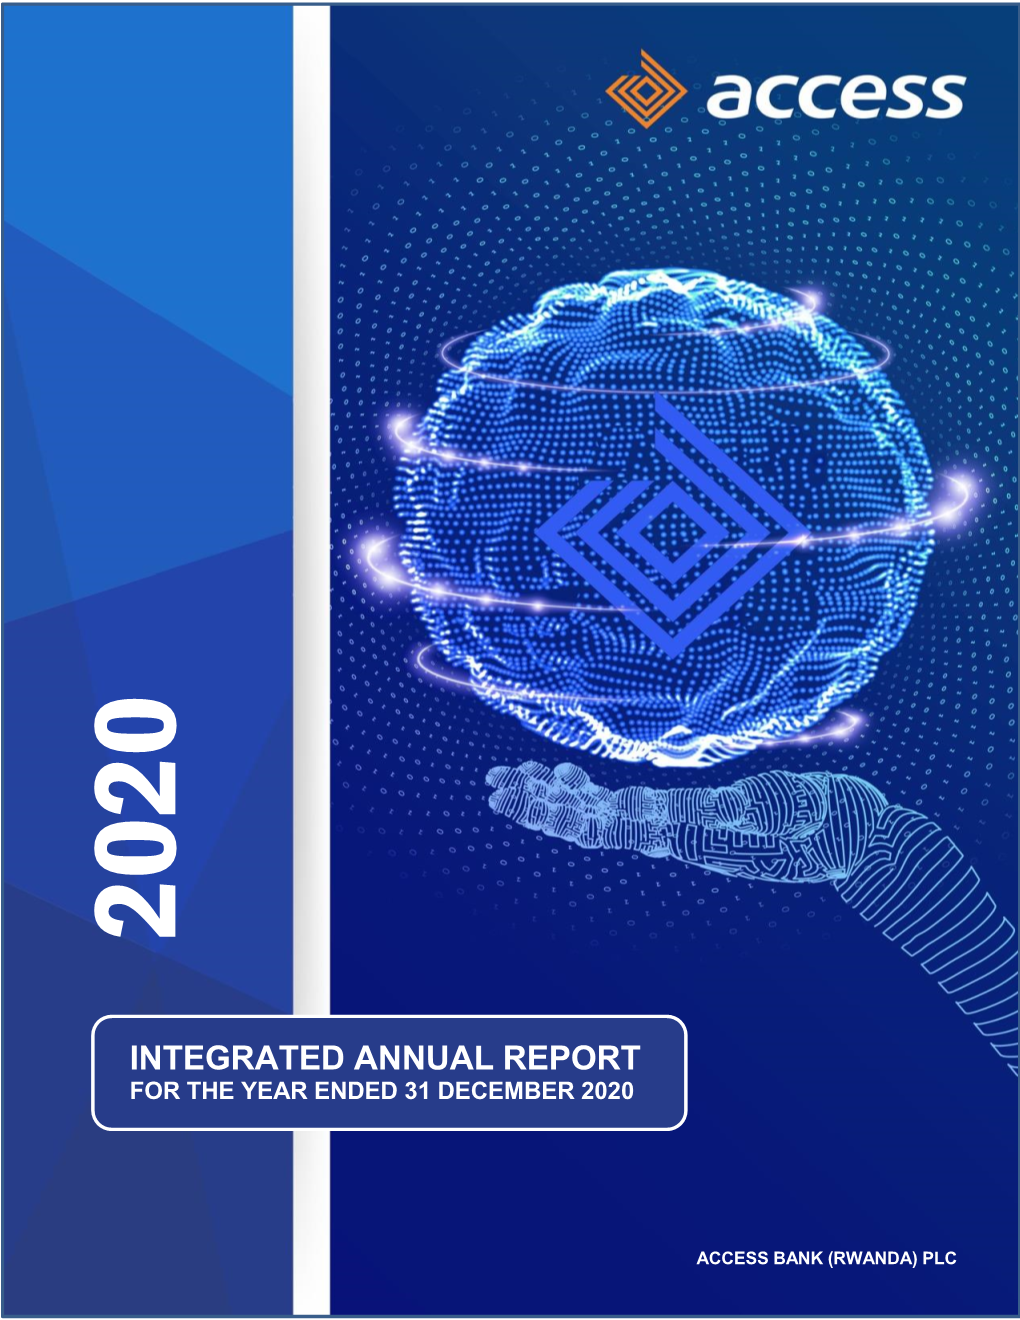 Integrated Annual Report for the Year Ended 31 December 2020